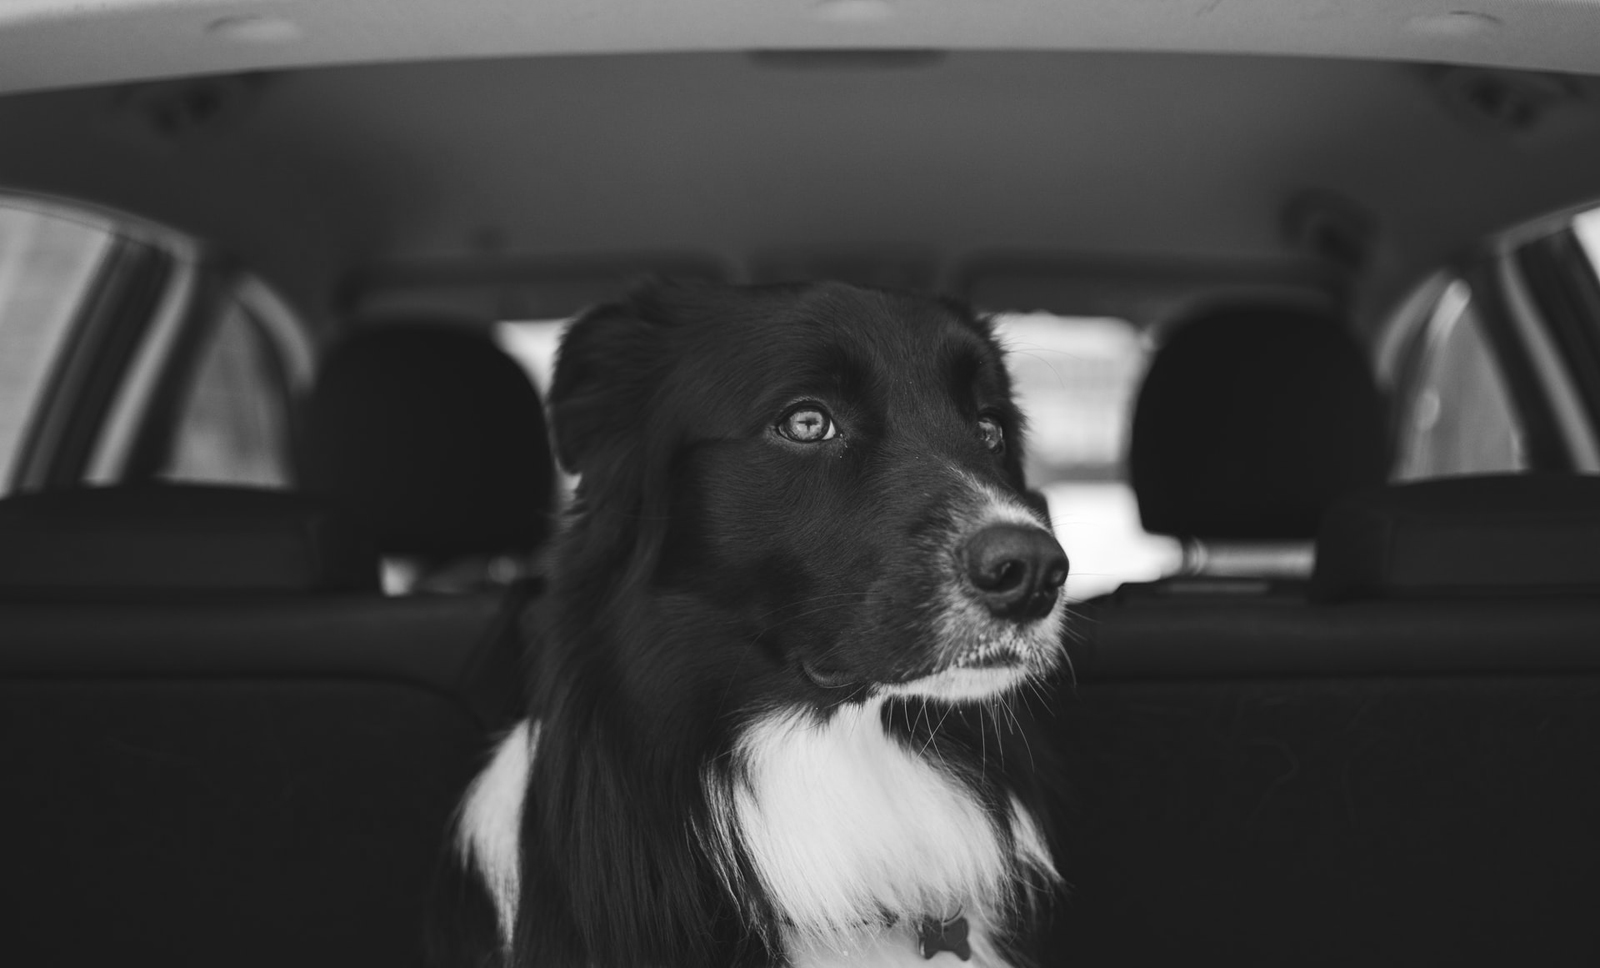 Driving With Animals: Transporting Your Pets Safely